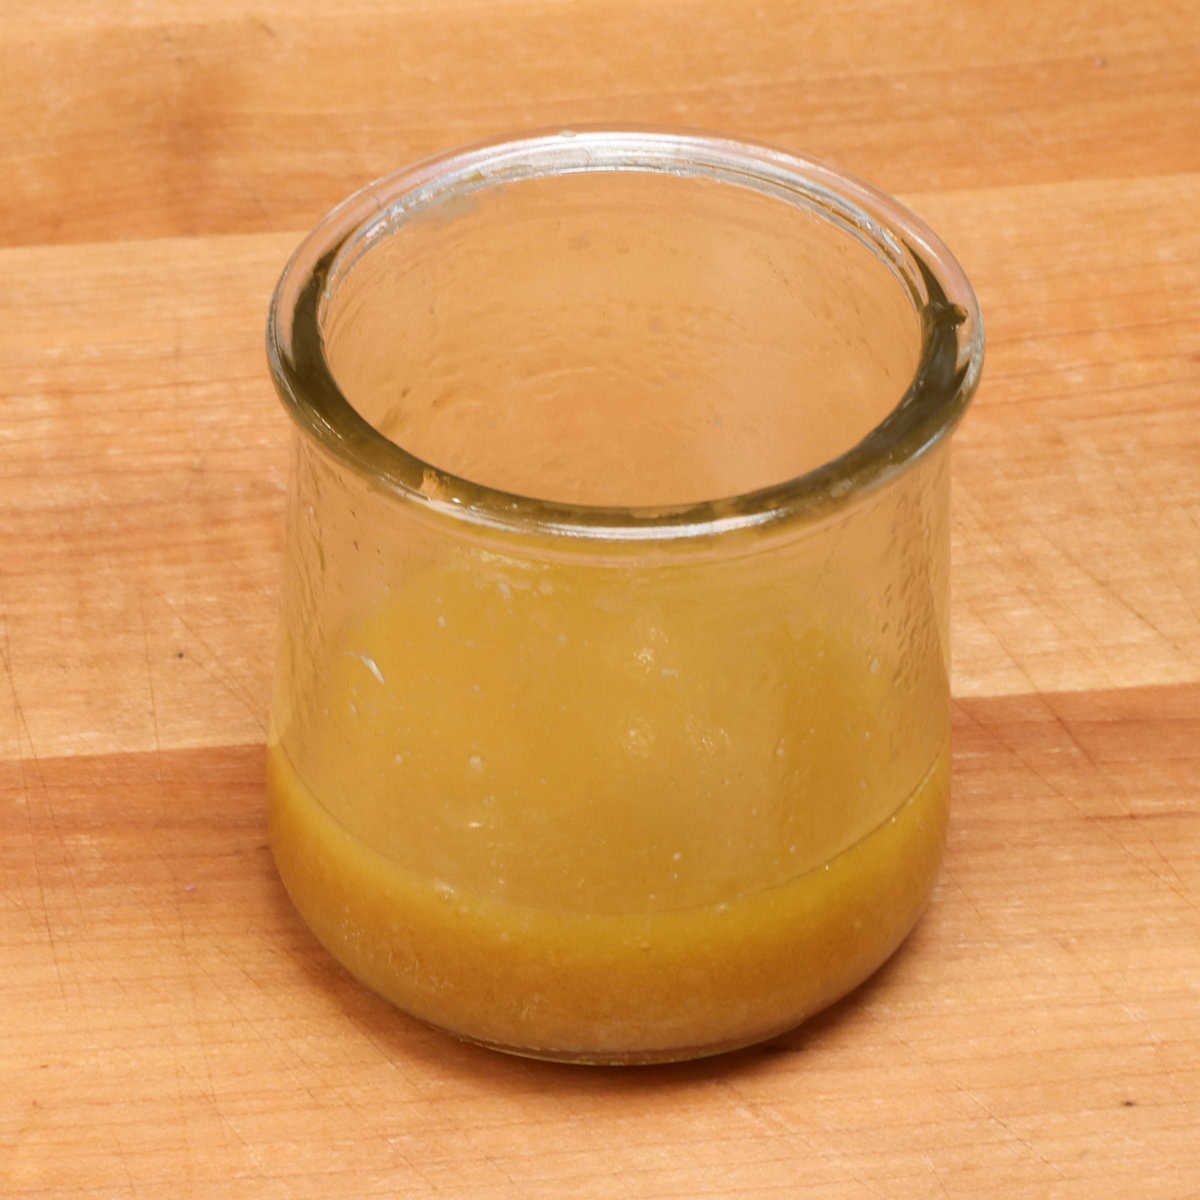 a small jar of homemade coleslaw dressing.